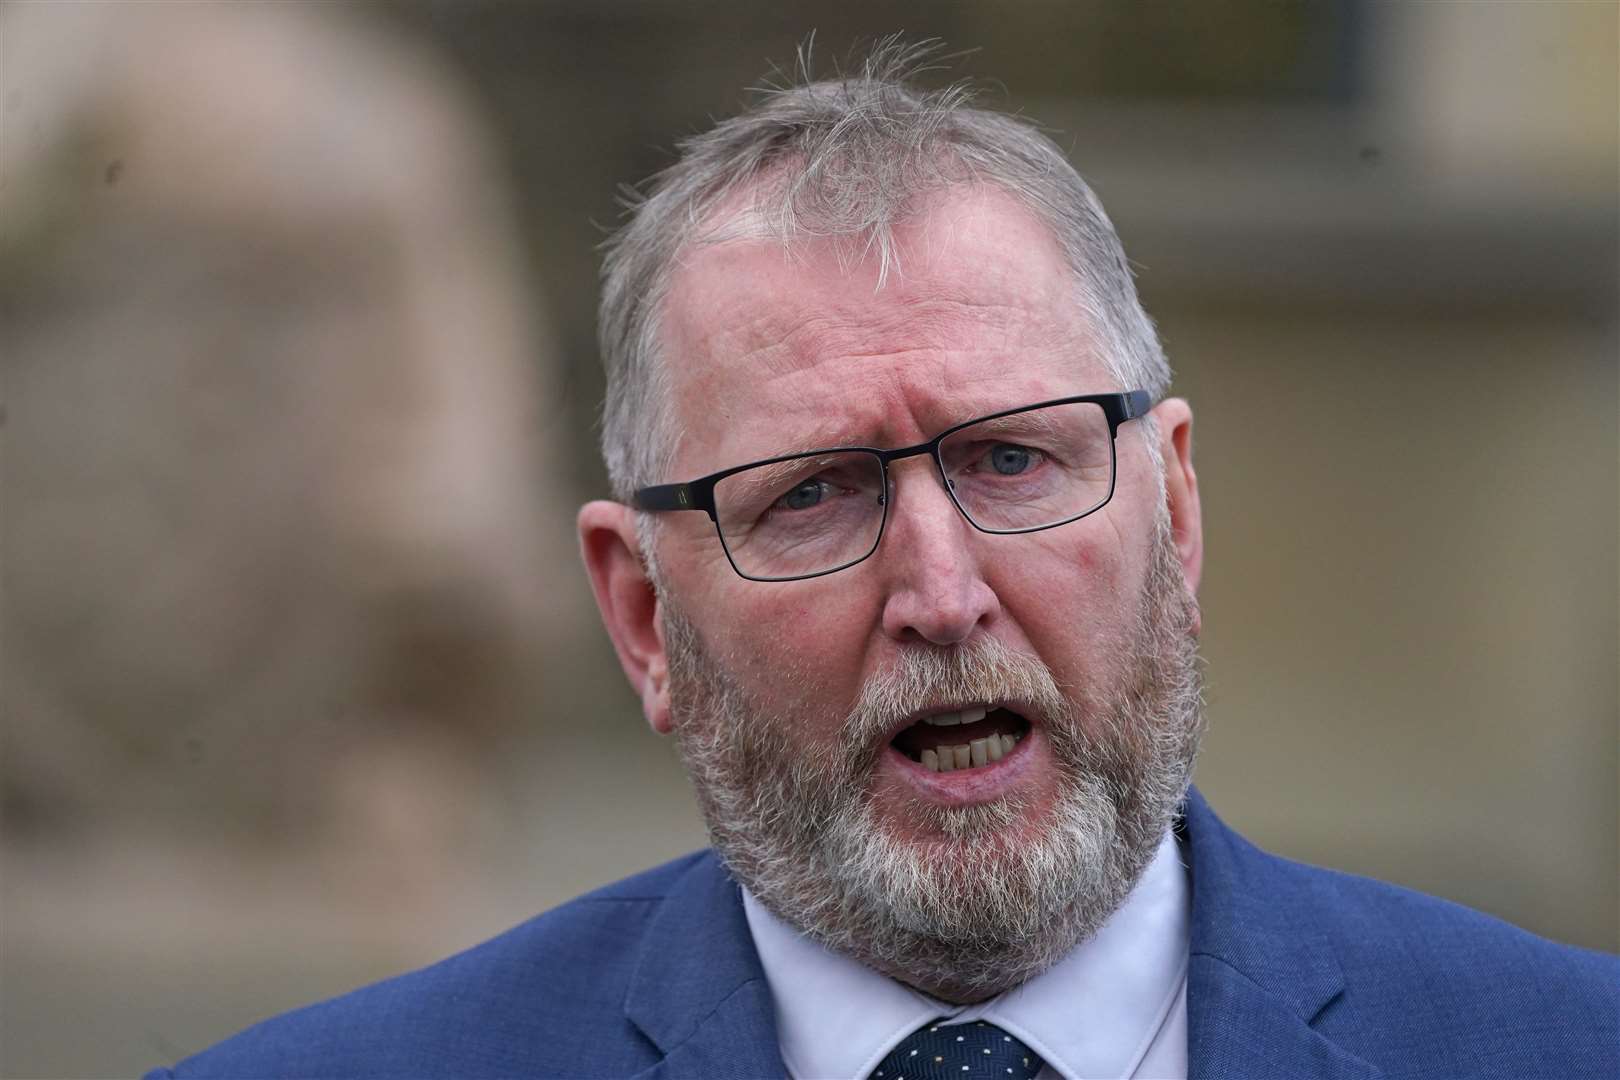 Doug Beattie, leader of the Ulster Unionist Party speaks to the media outside Stormont Castle (Brian Lawless/PA)